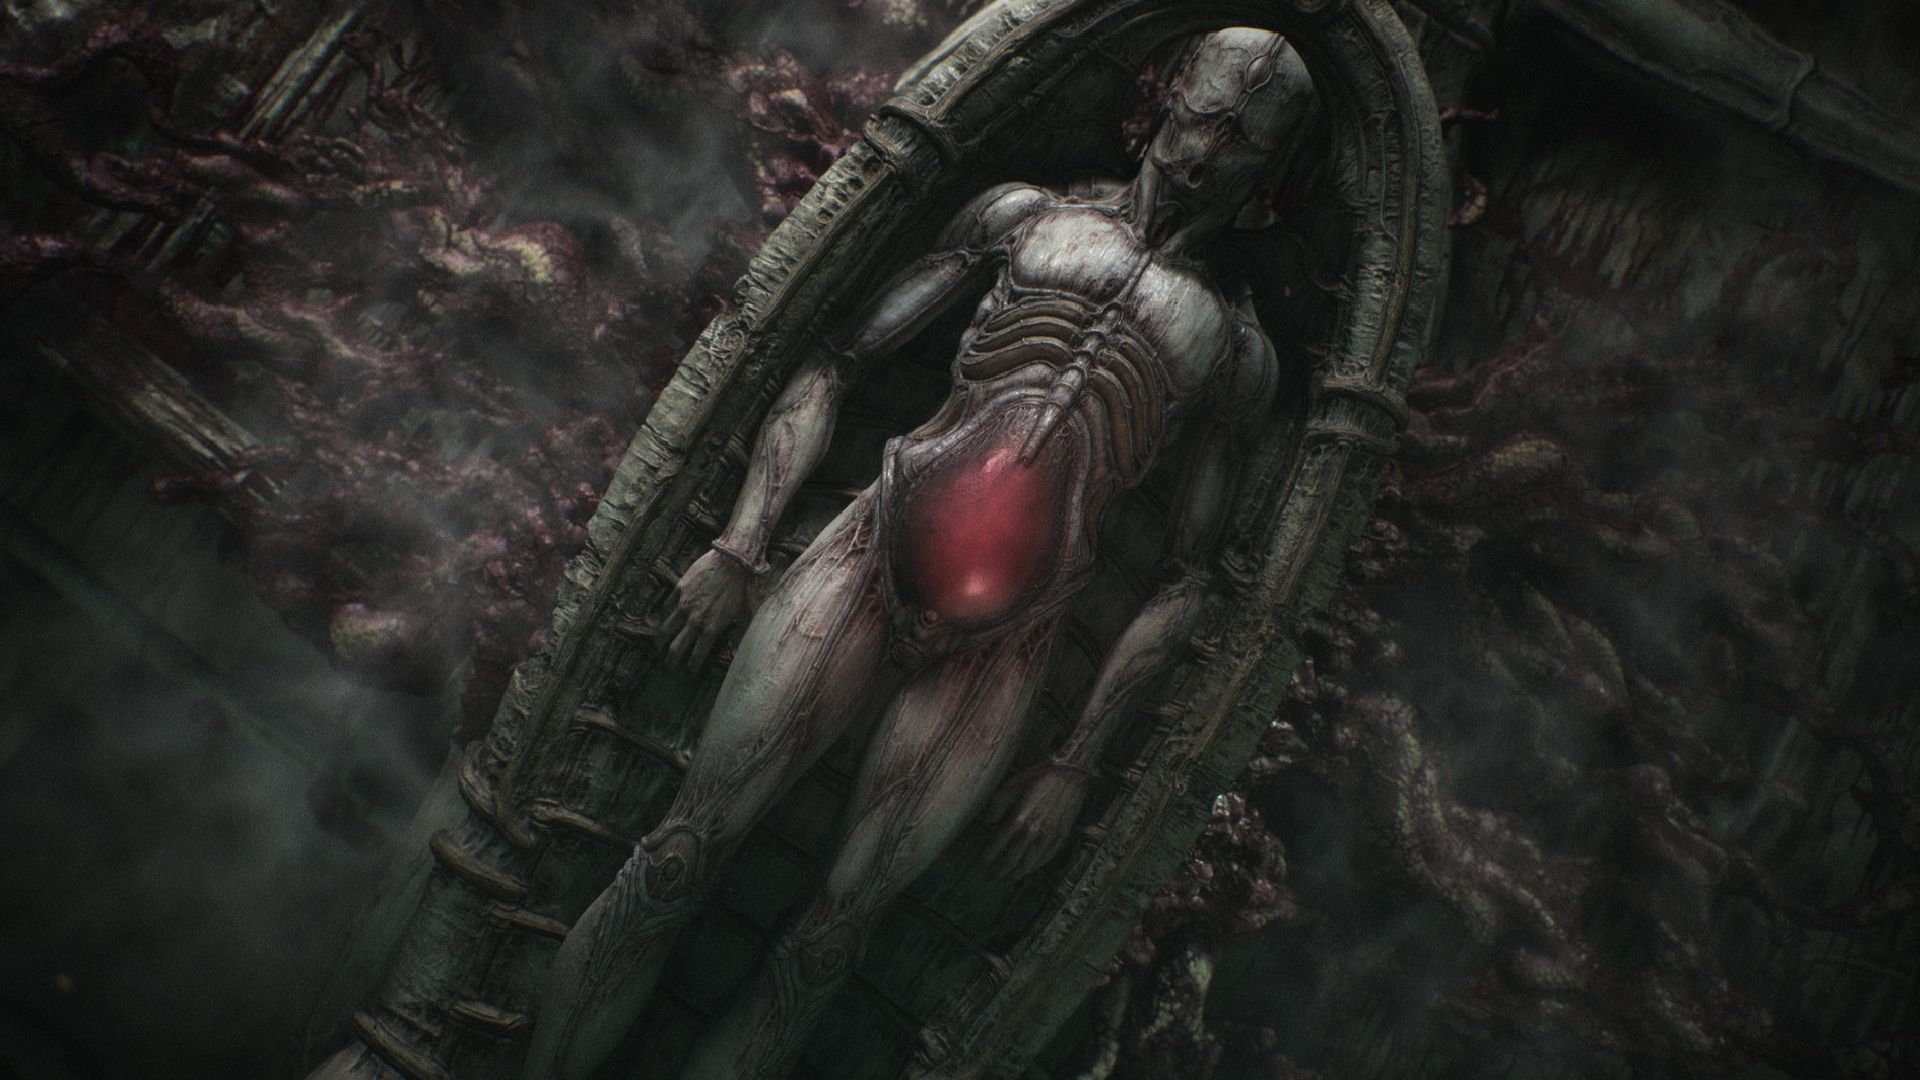 Scorn Game Pass: A large body with a womb that is red is shown